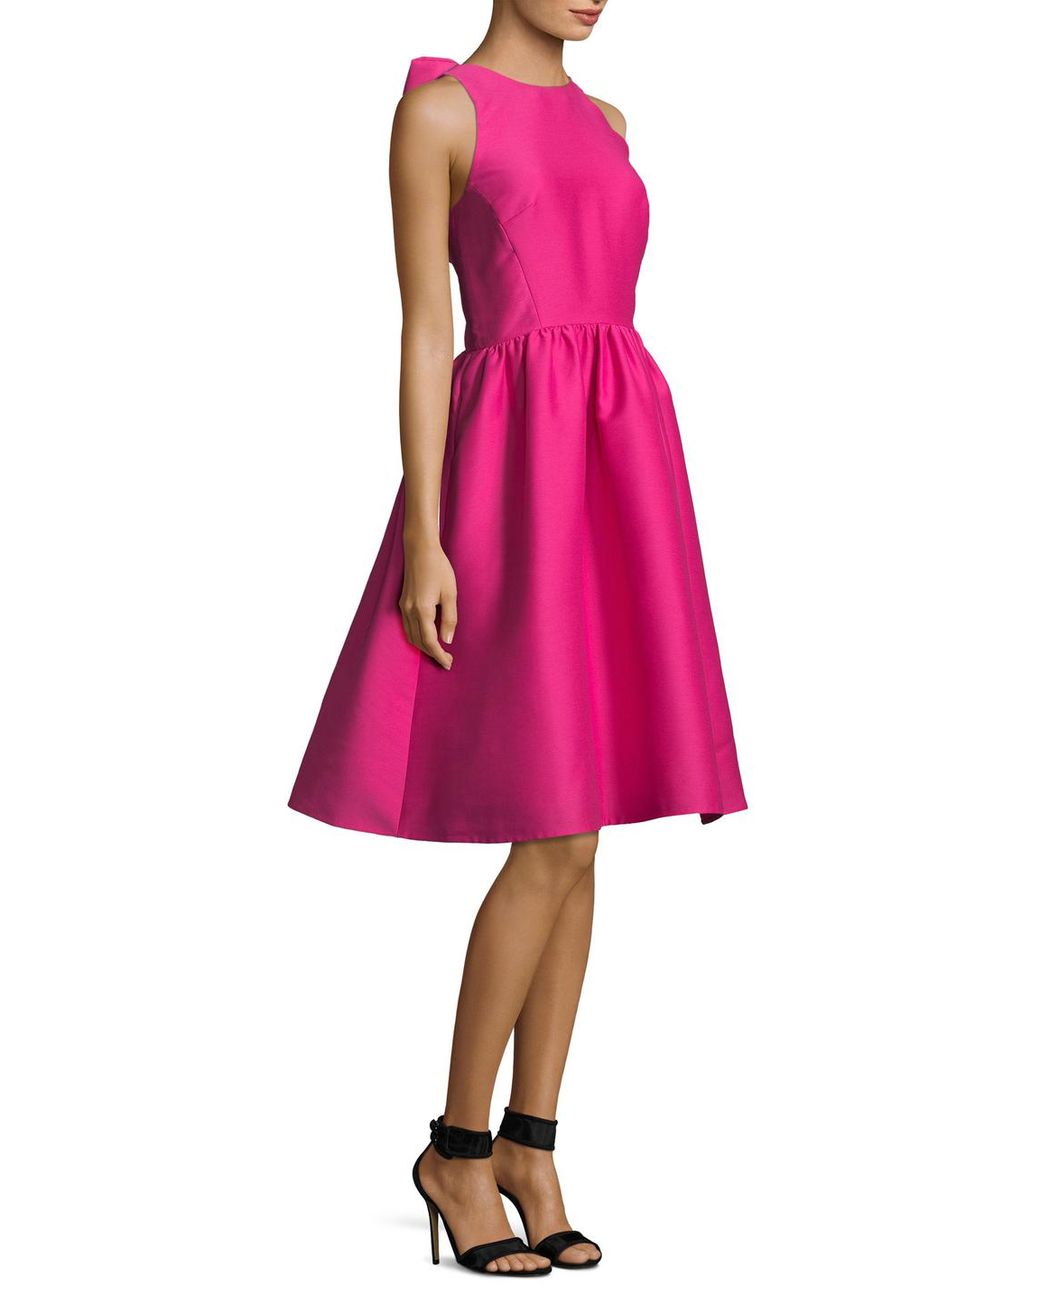 Kate Spade Bow Back Fit And Flare Dress in Pink | Lyst